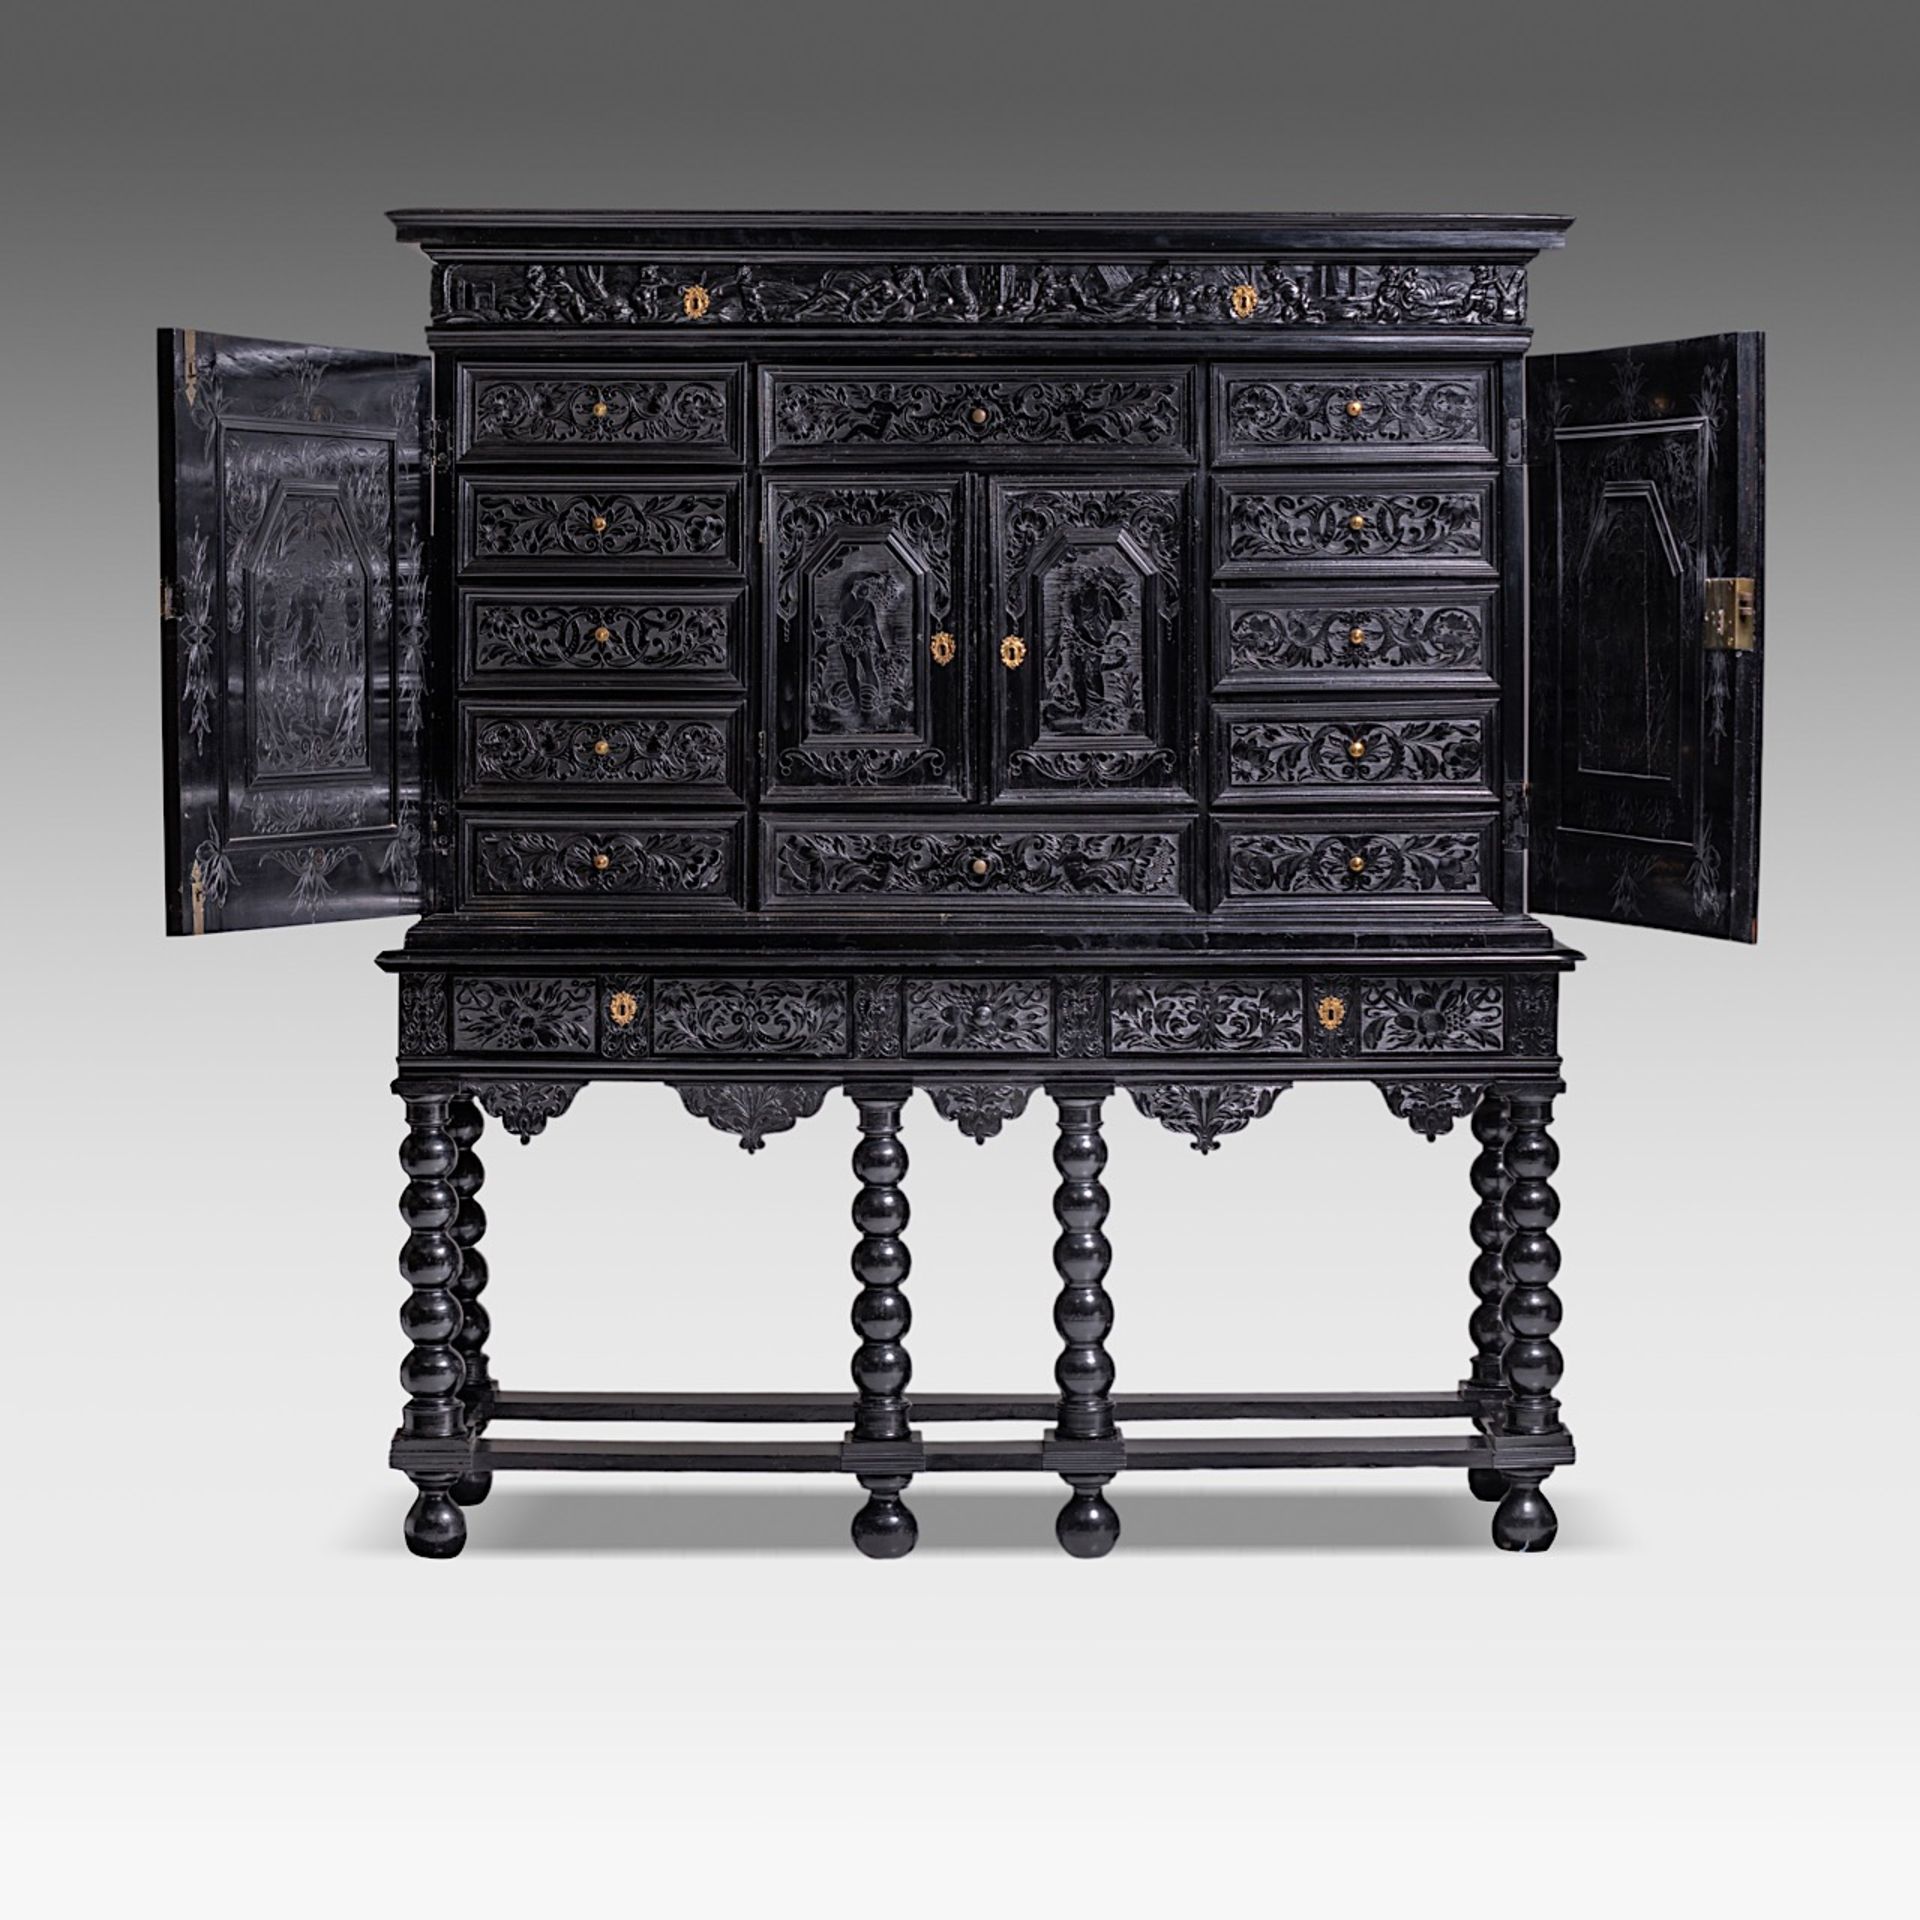 PREMIUM LOT - An exceptional 17thC French ebony and ebonised cabinet-on-stand, H 181,5 - W 163 - D 5 - Bild 2 aus 14